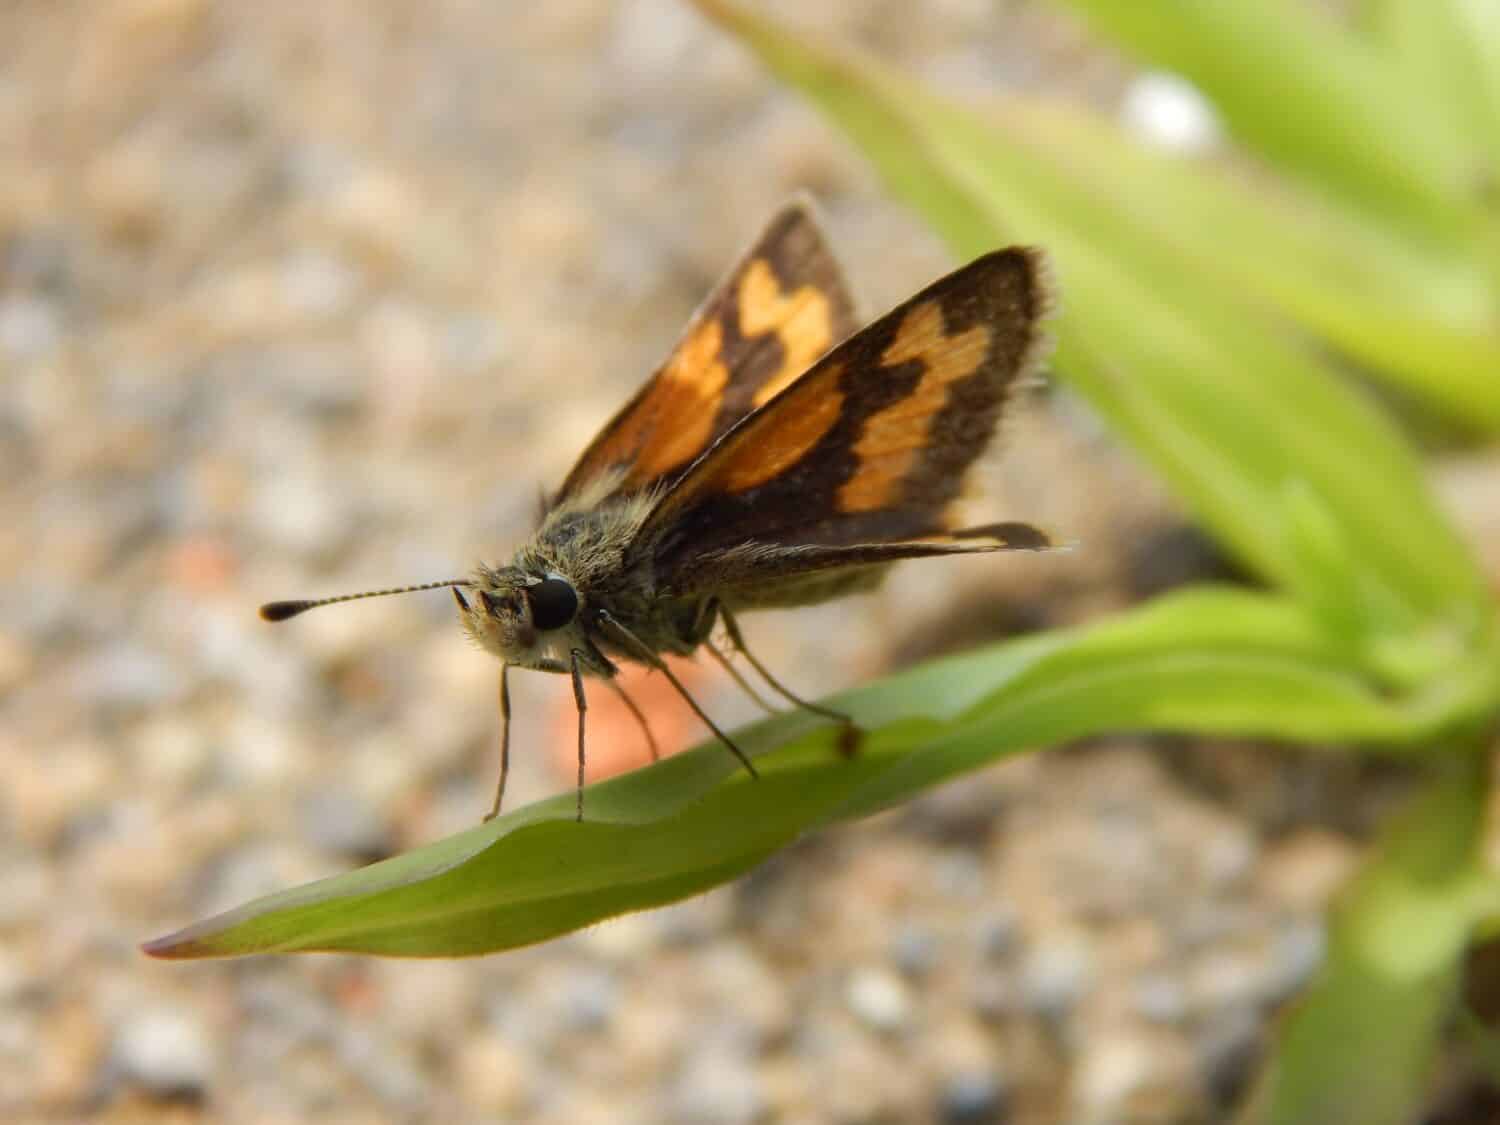 The spotted silver butterfly or Hesperia comma, the silver spotted skipper or common brand skipper, is a butterfly from the family Hesperiidae.